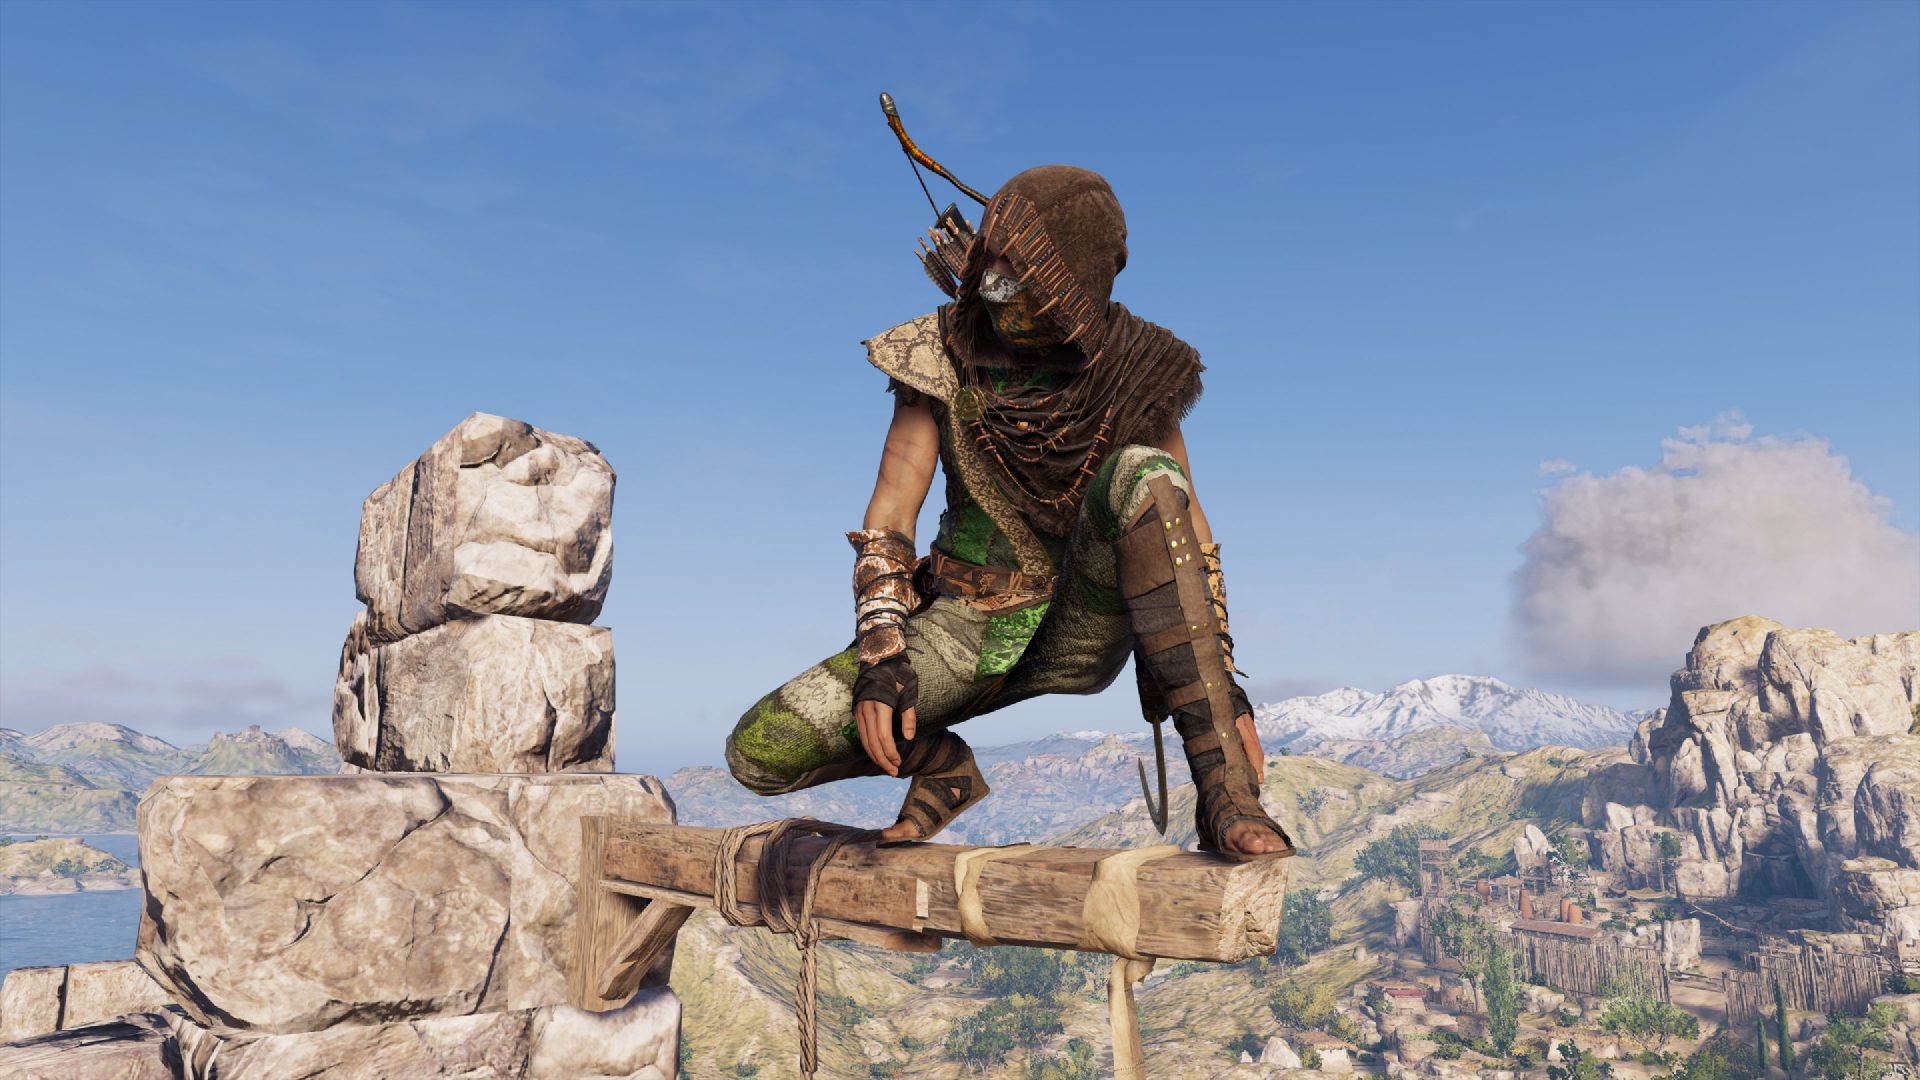 Assassin's Creed Odyssey 3